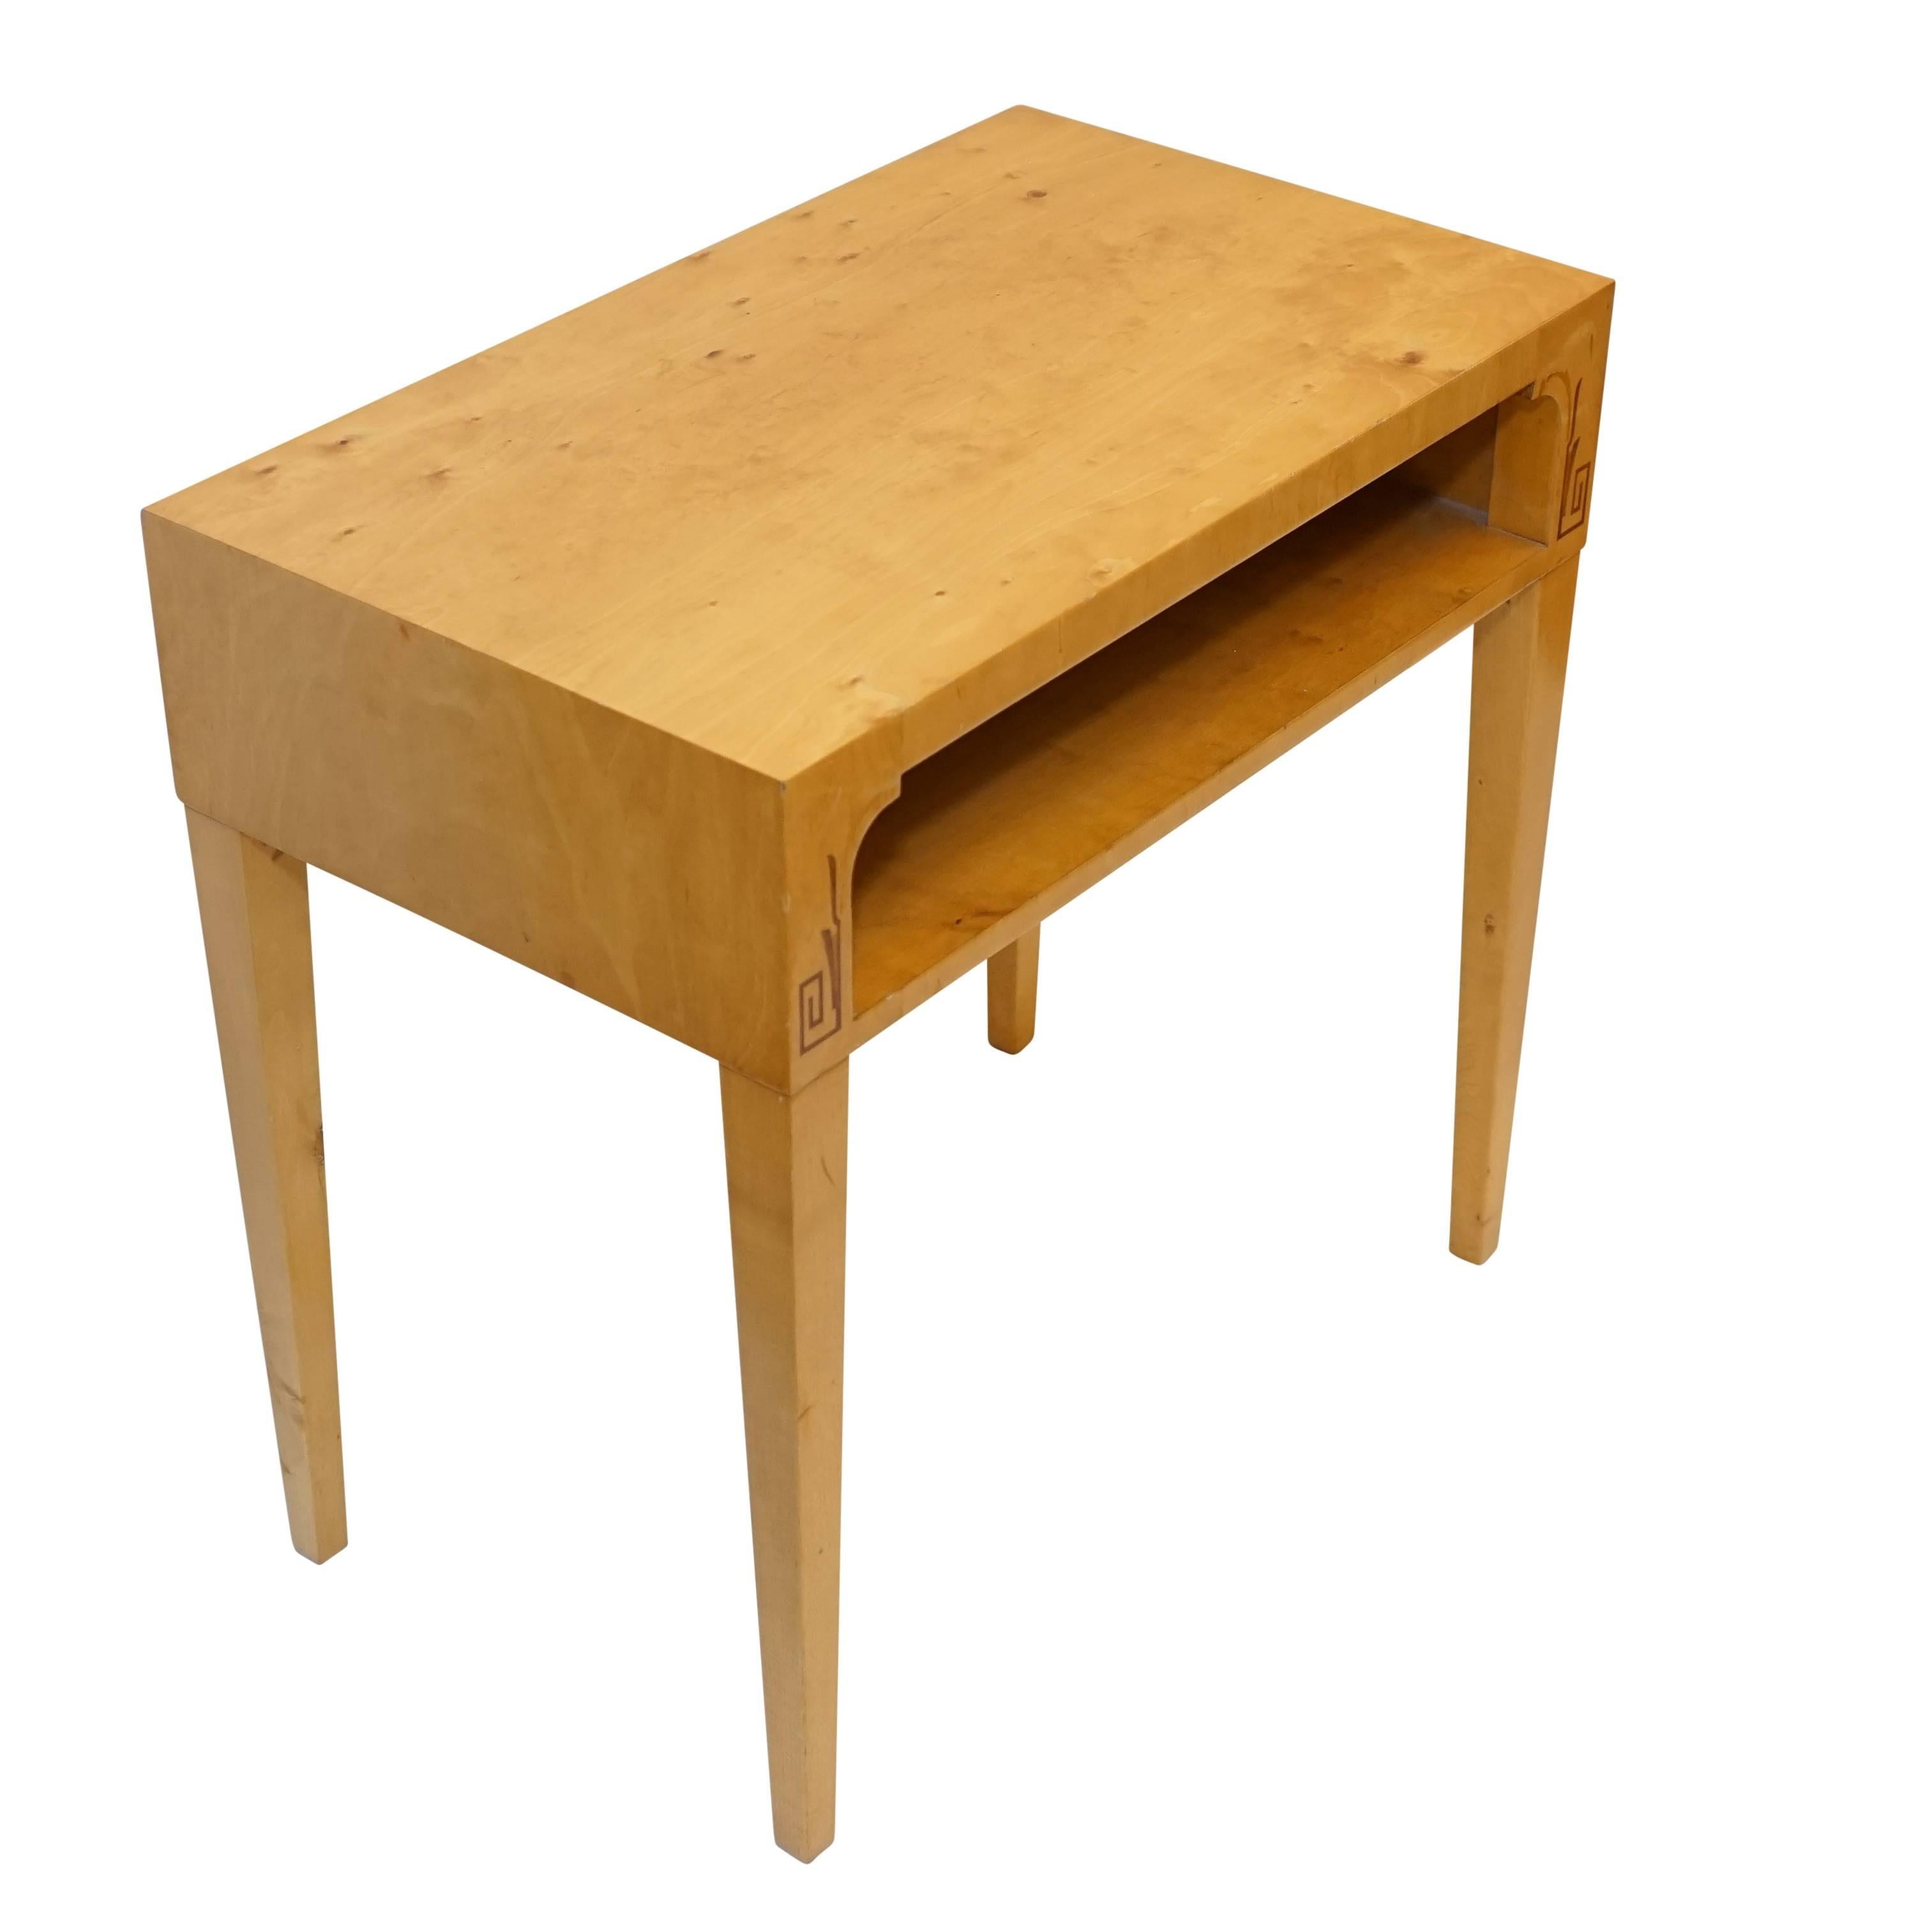 Crafted of solid birch and fir, the simple table features stylized intarsia of ash and mahogany flanking the lower open compartment which is veneered in finished golden birch.